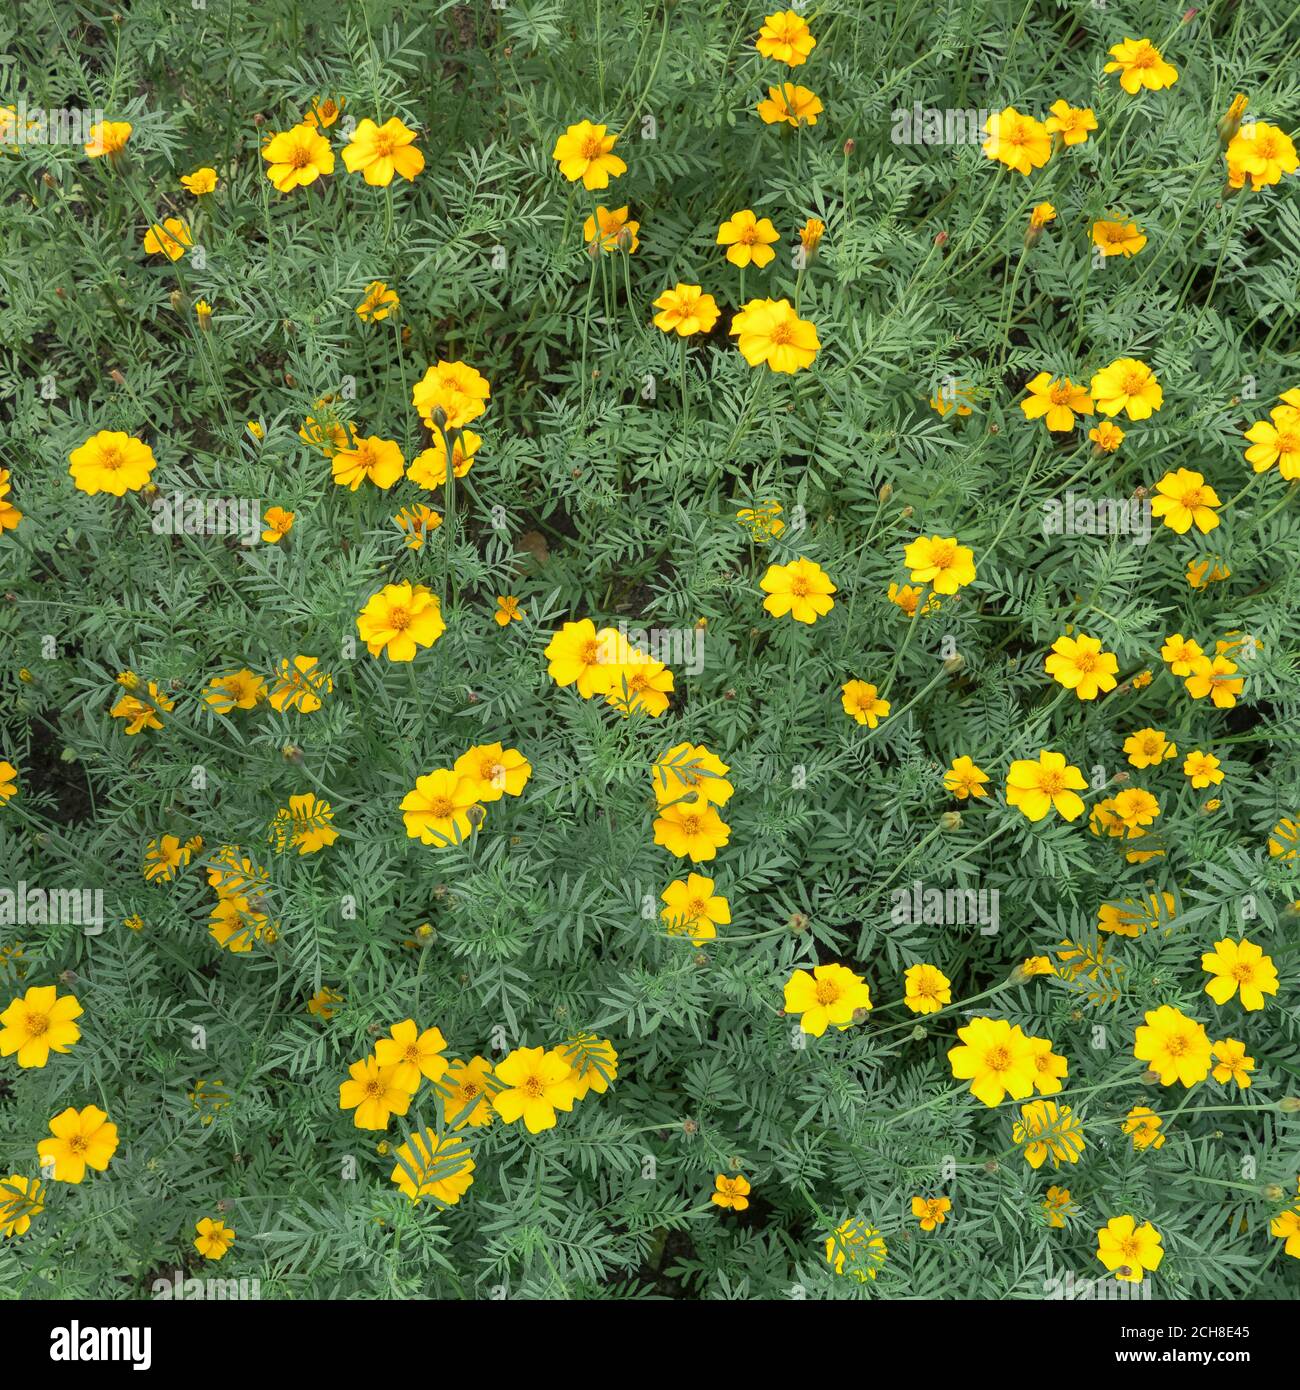 Yellow flowers in nature, top view Stock Photo